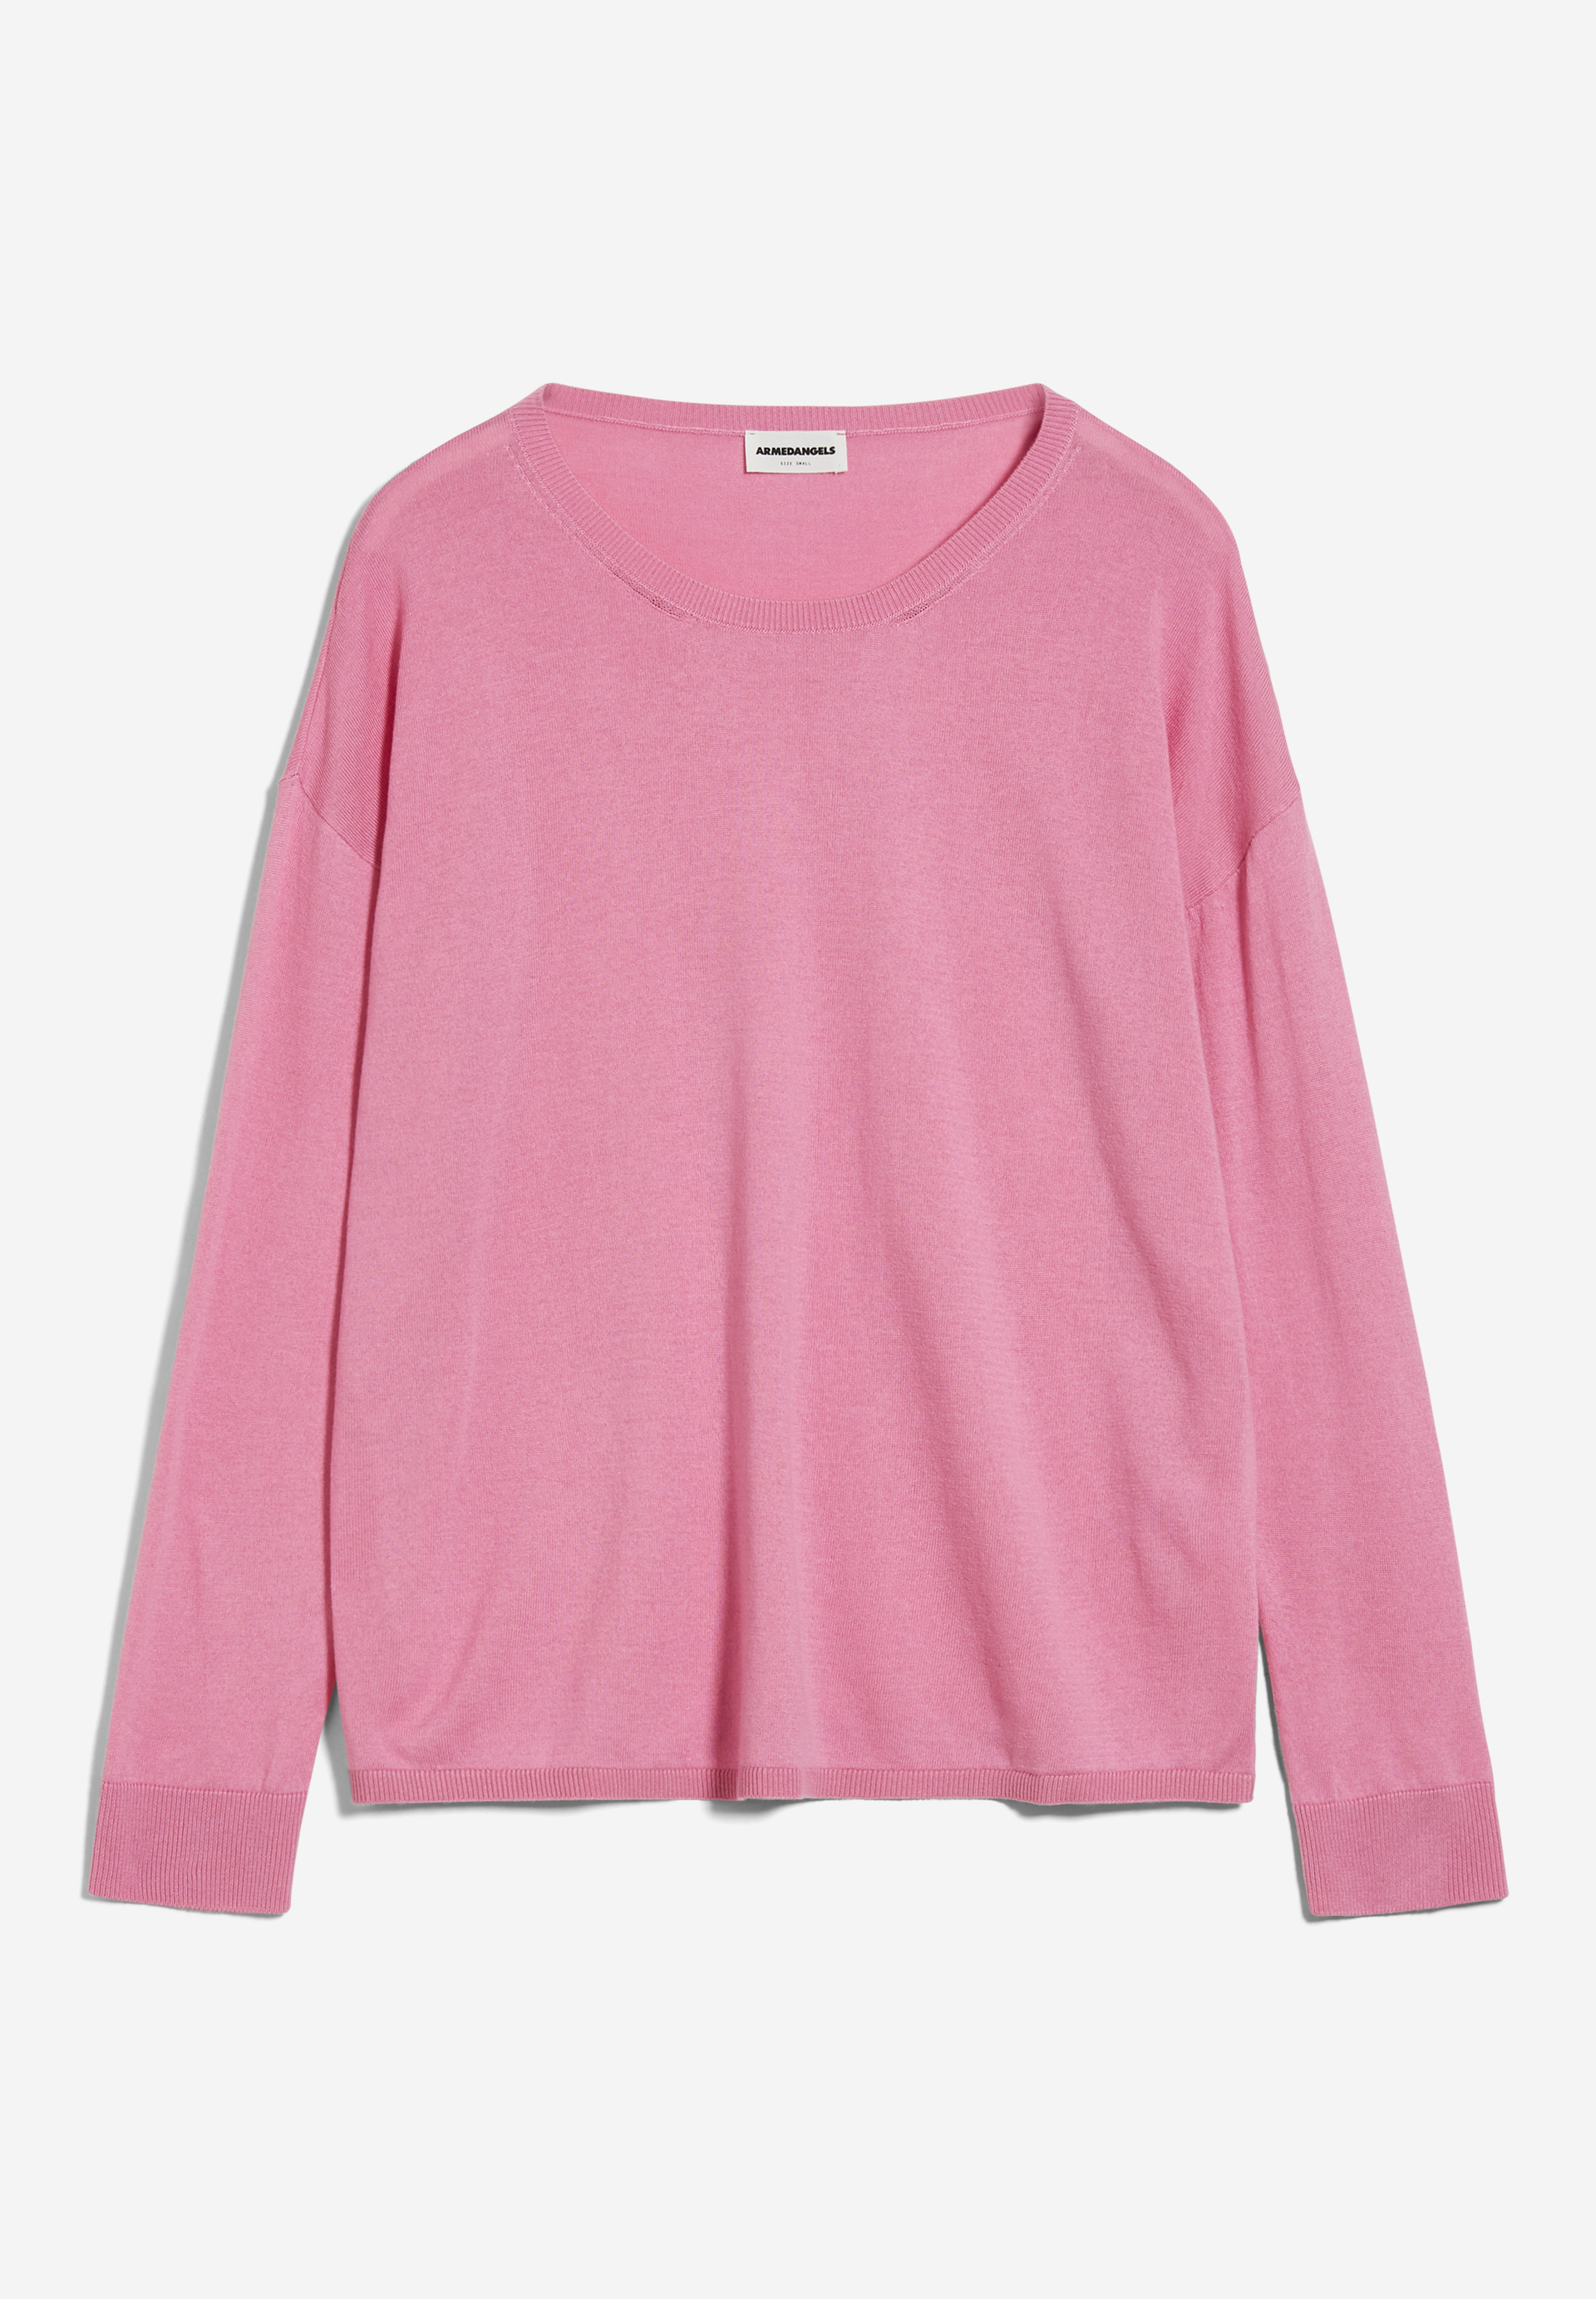 LAARNI Sweater Relaxed Fit made of TENCEL™ Lyocell Mix